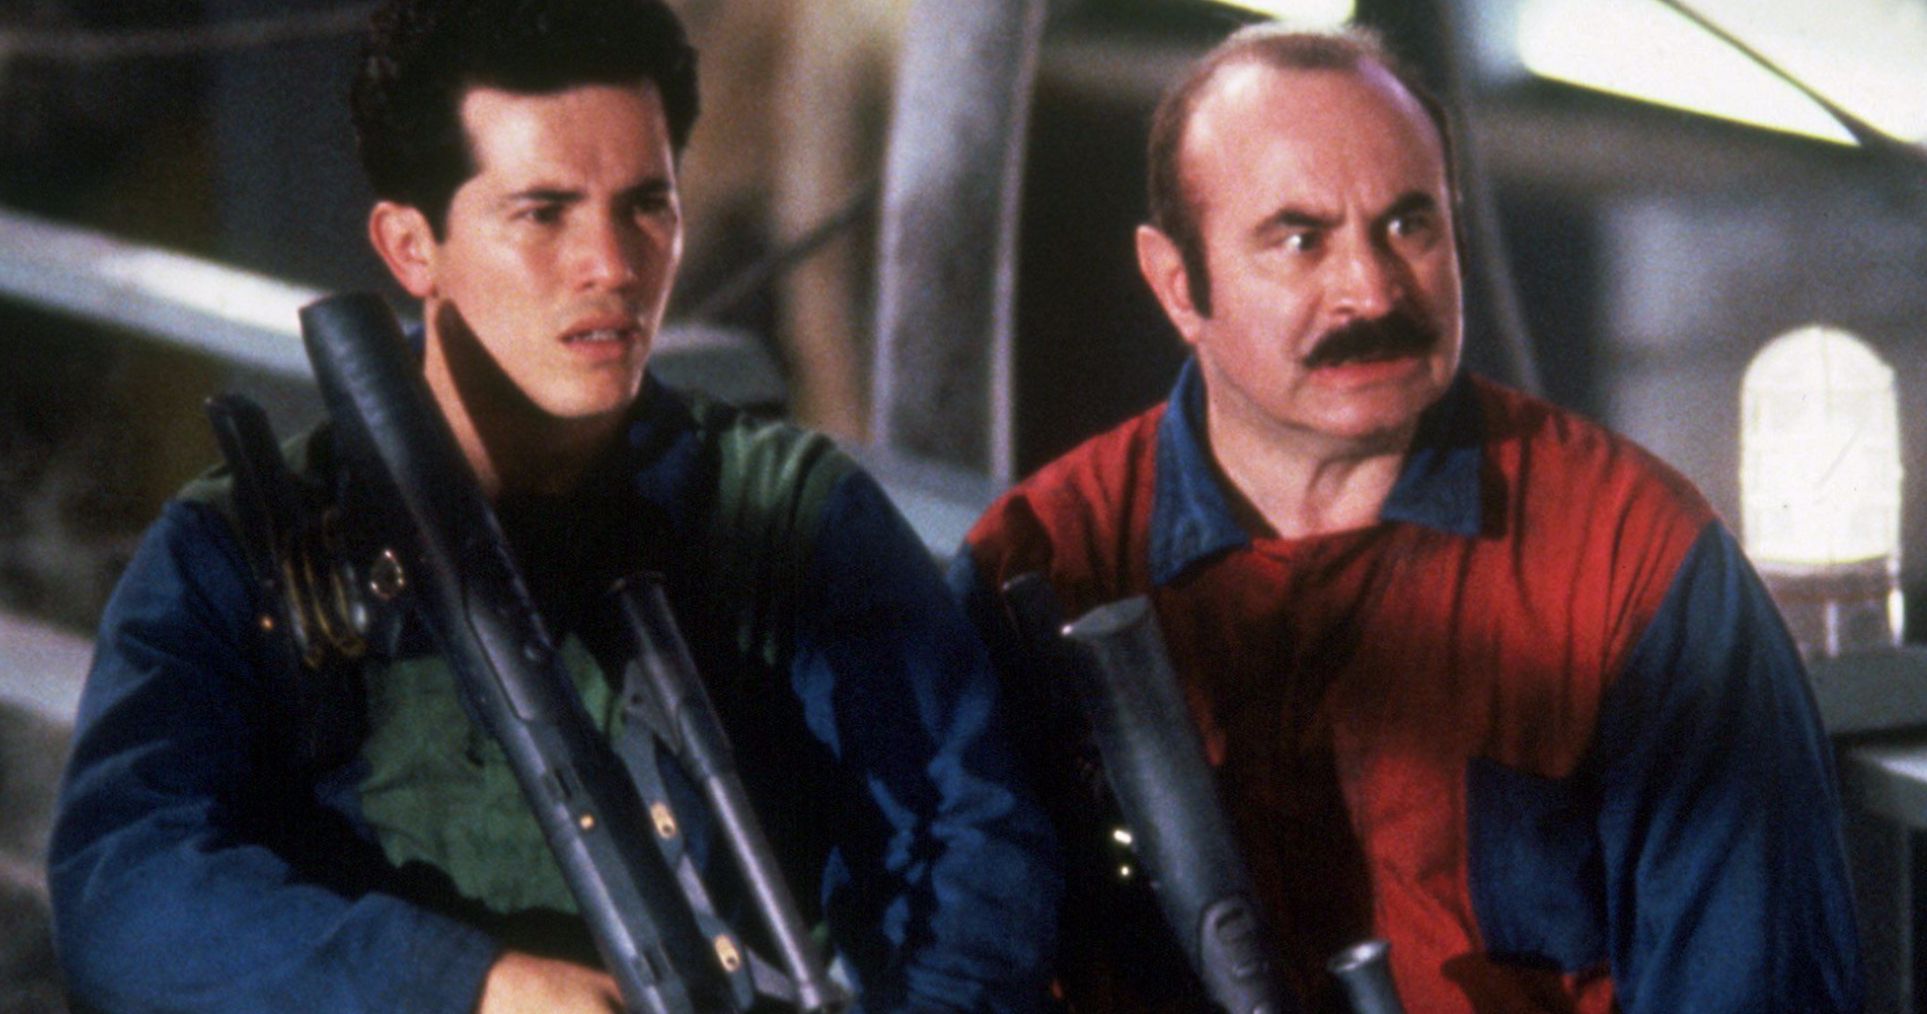 Super Mario Bros. Deleted Scene Surfaces After Extended Cut Is Discovered